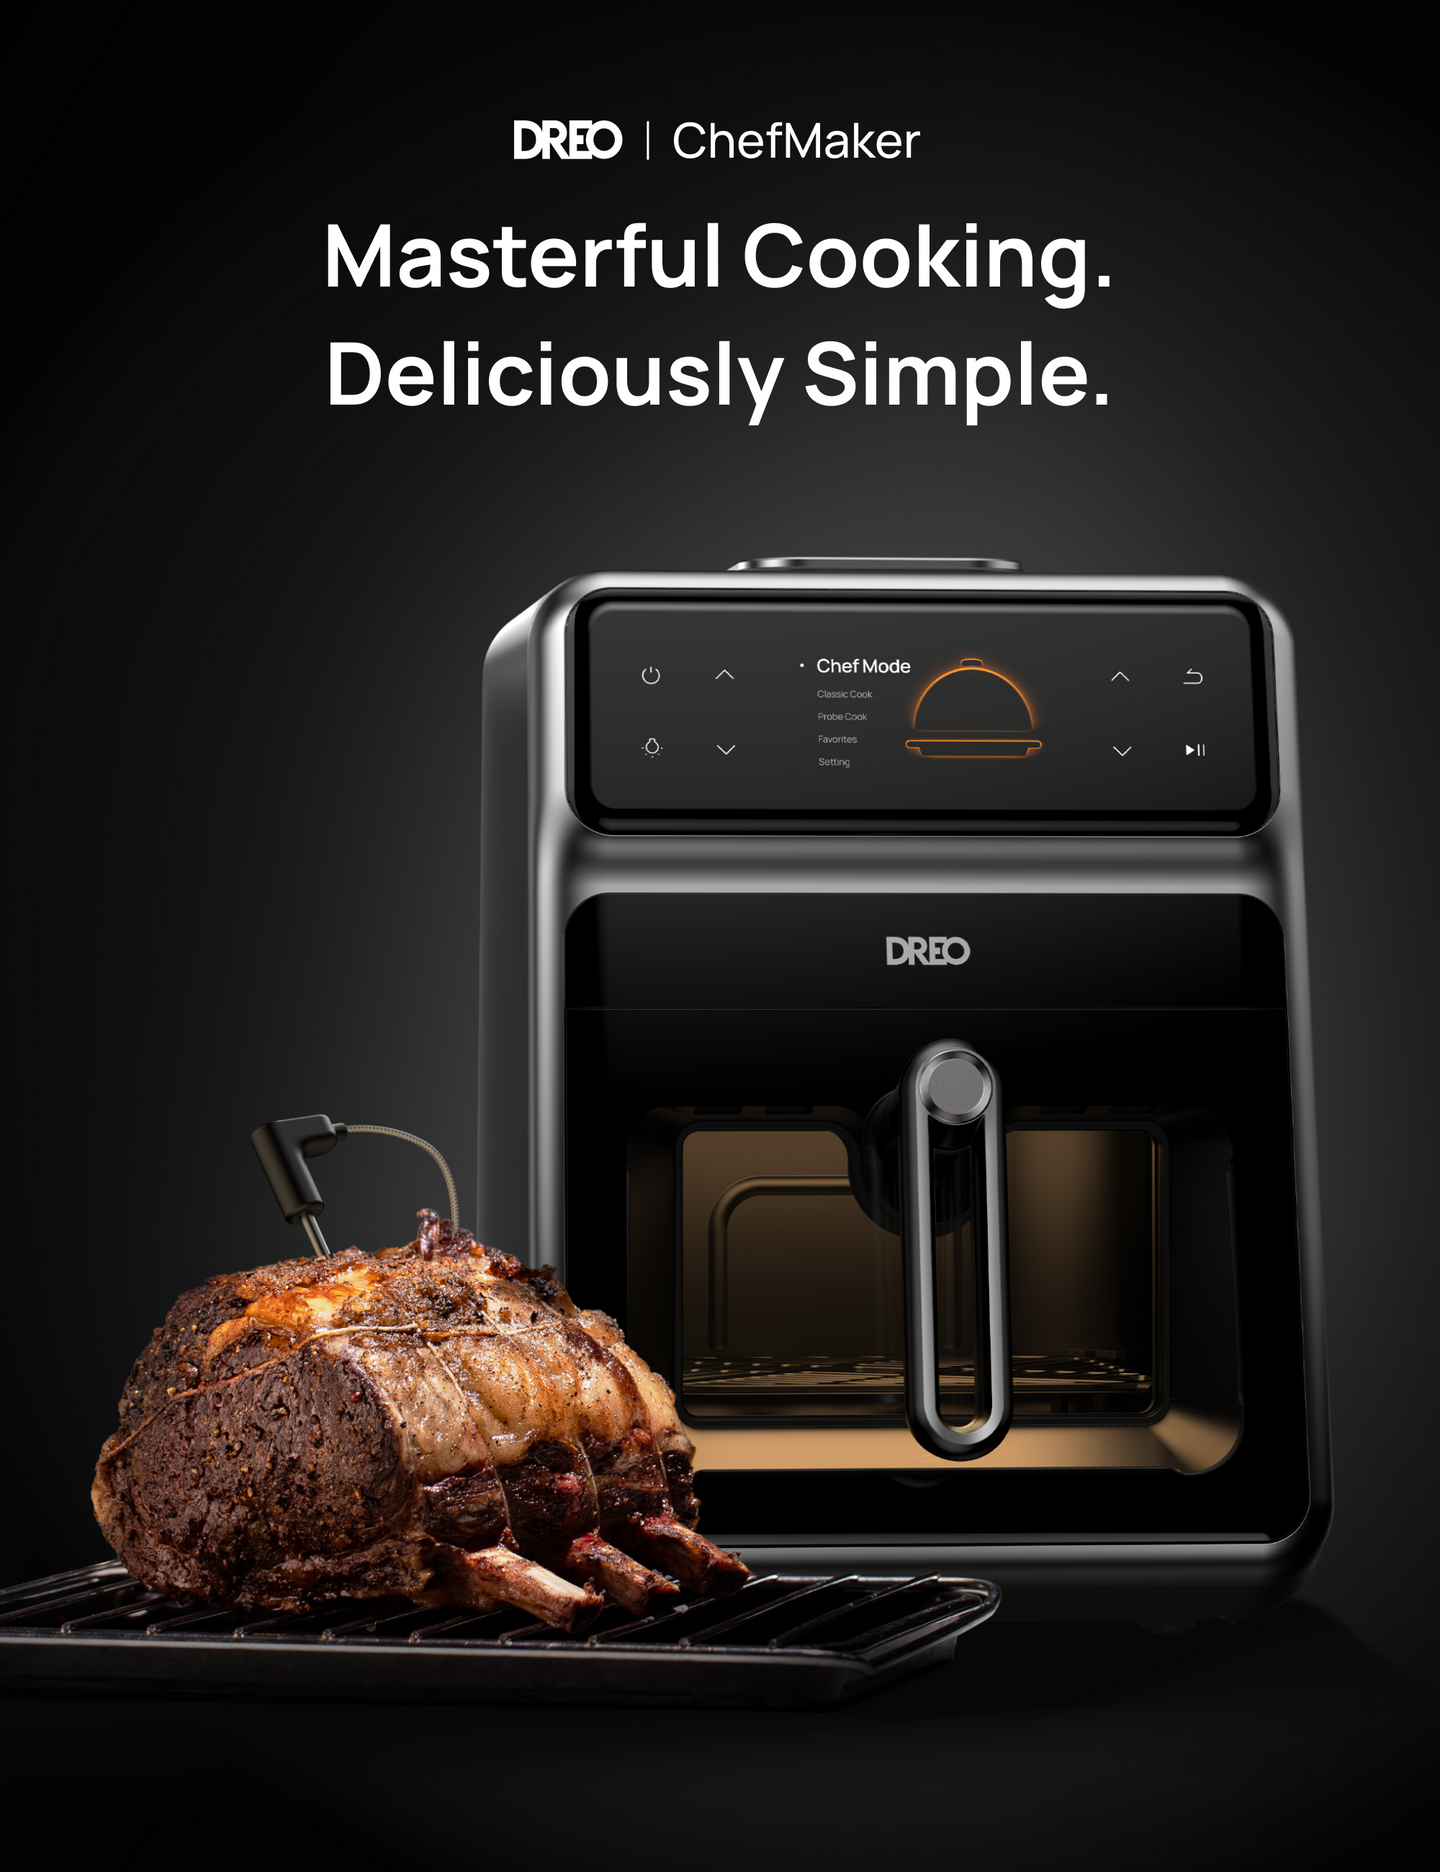 It's Finally Here! Dreo Chefmaker Makes A Debut